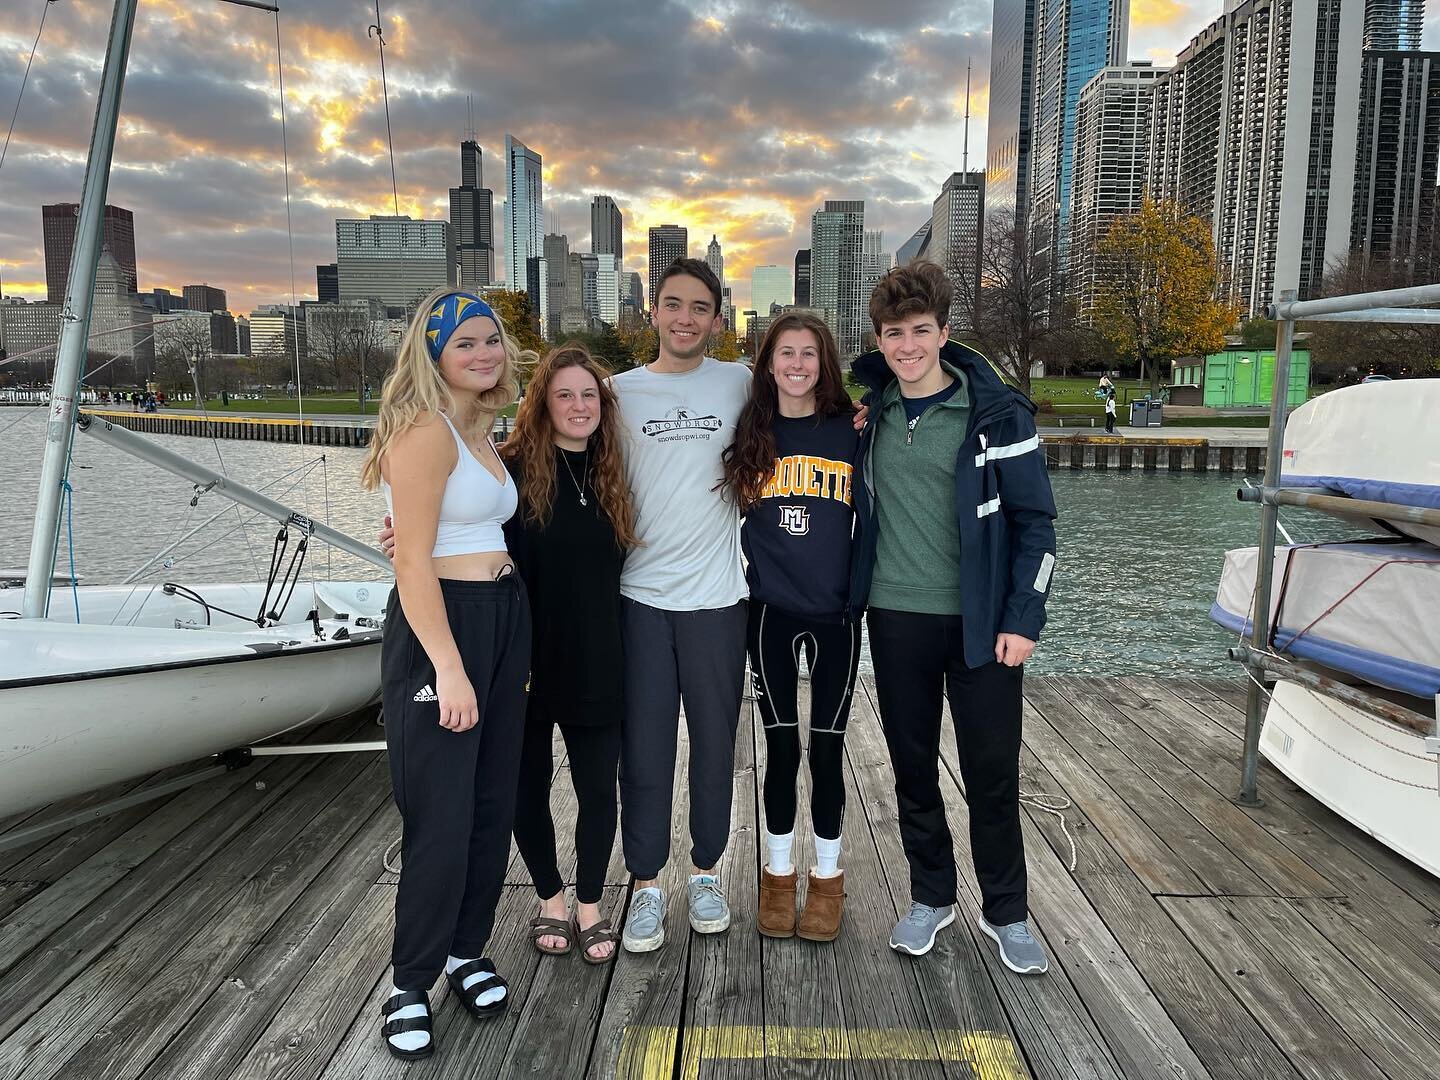 Well, that&rsquo;s a wrap! Marquette Sailing ended the season racing at Fall Champs where we took 6th overall, 6th for A, and 3rd for B. Congratulations sailors - thank you all for a great fall season! #MUST